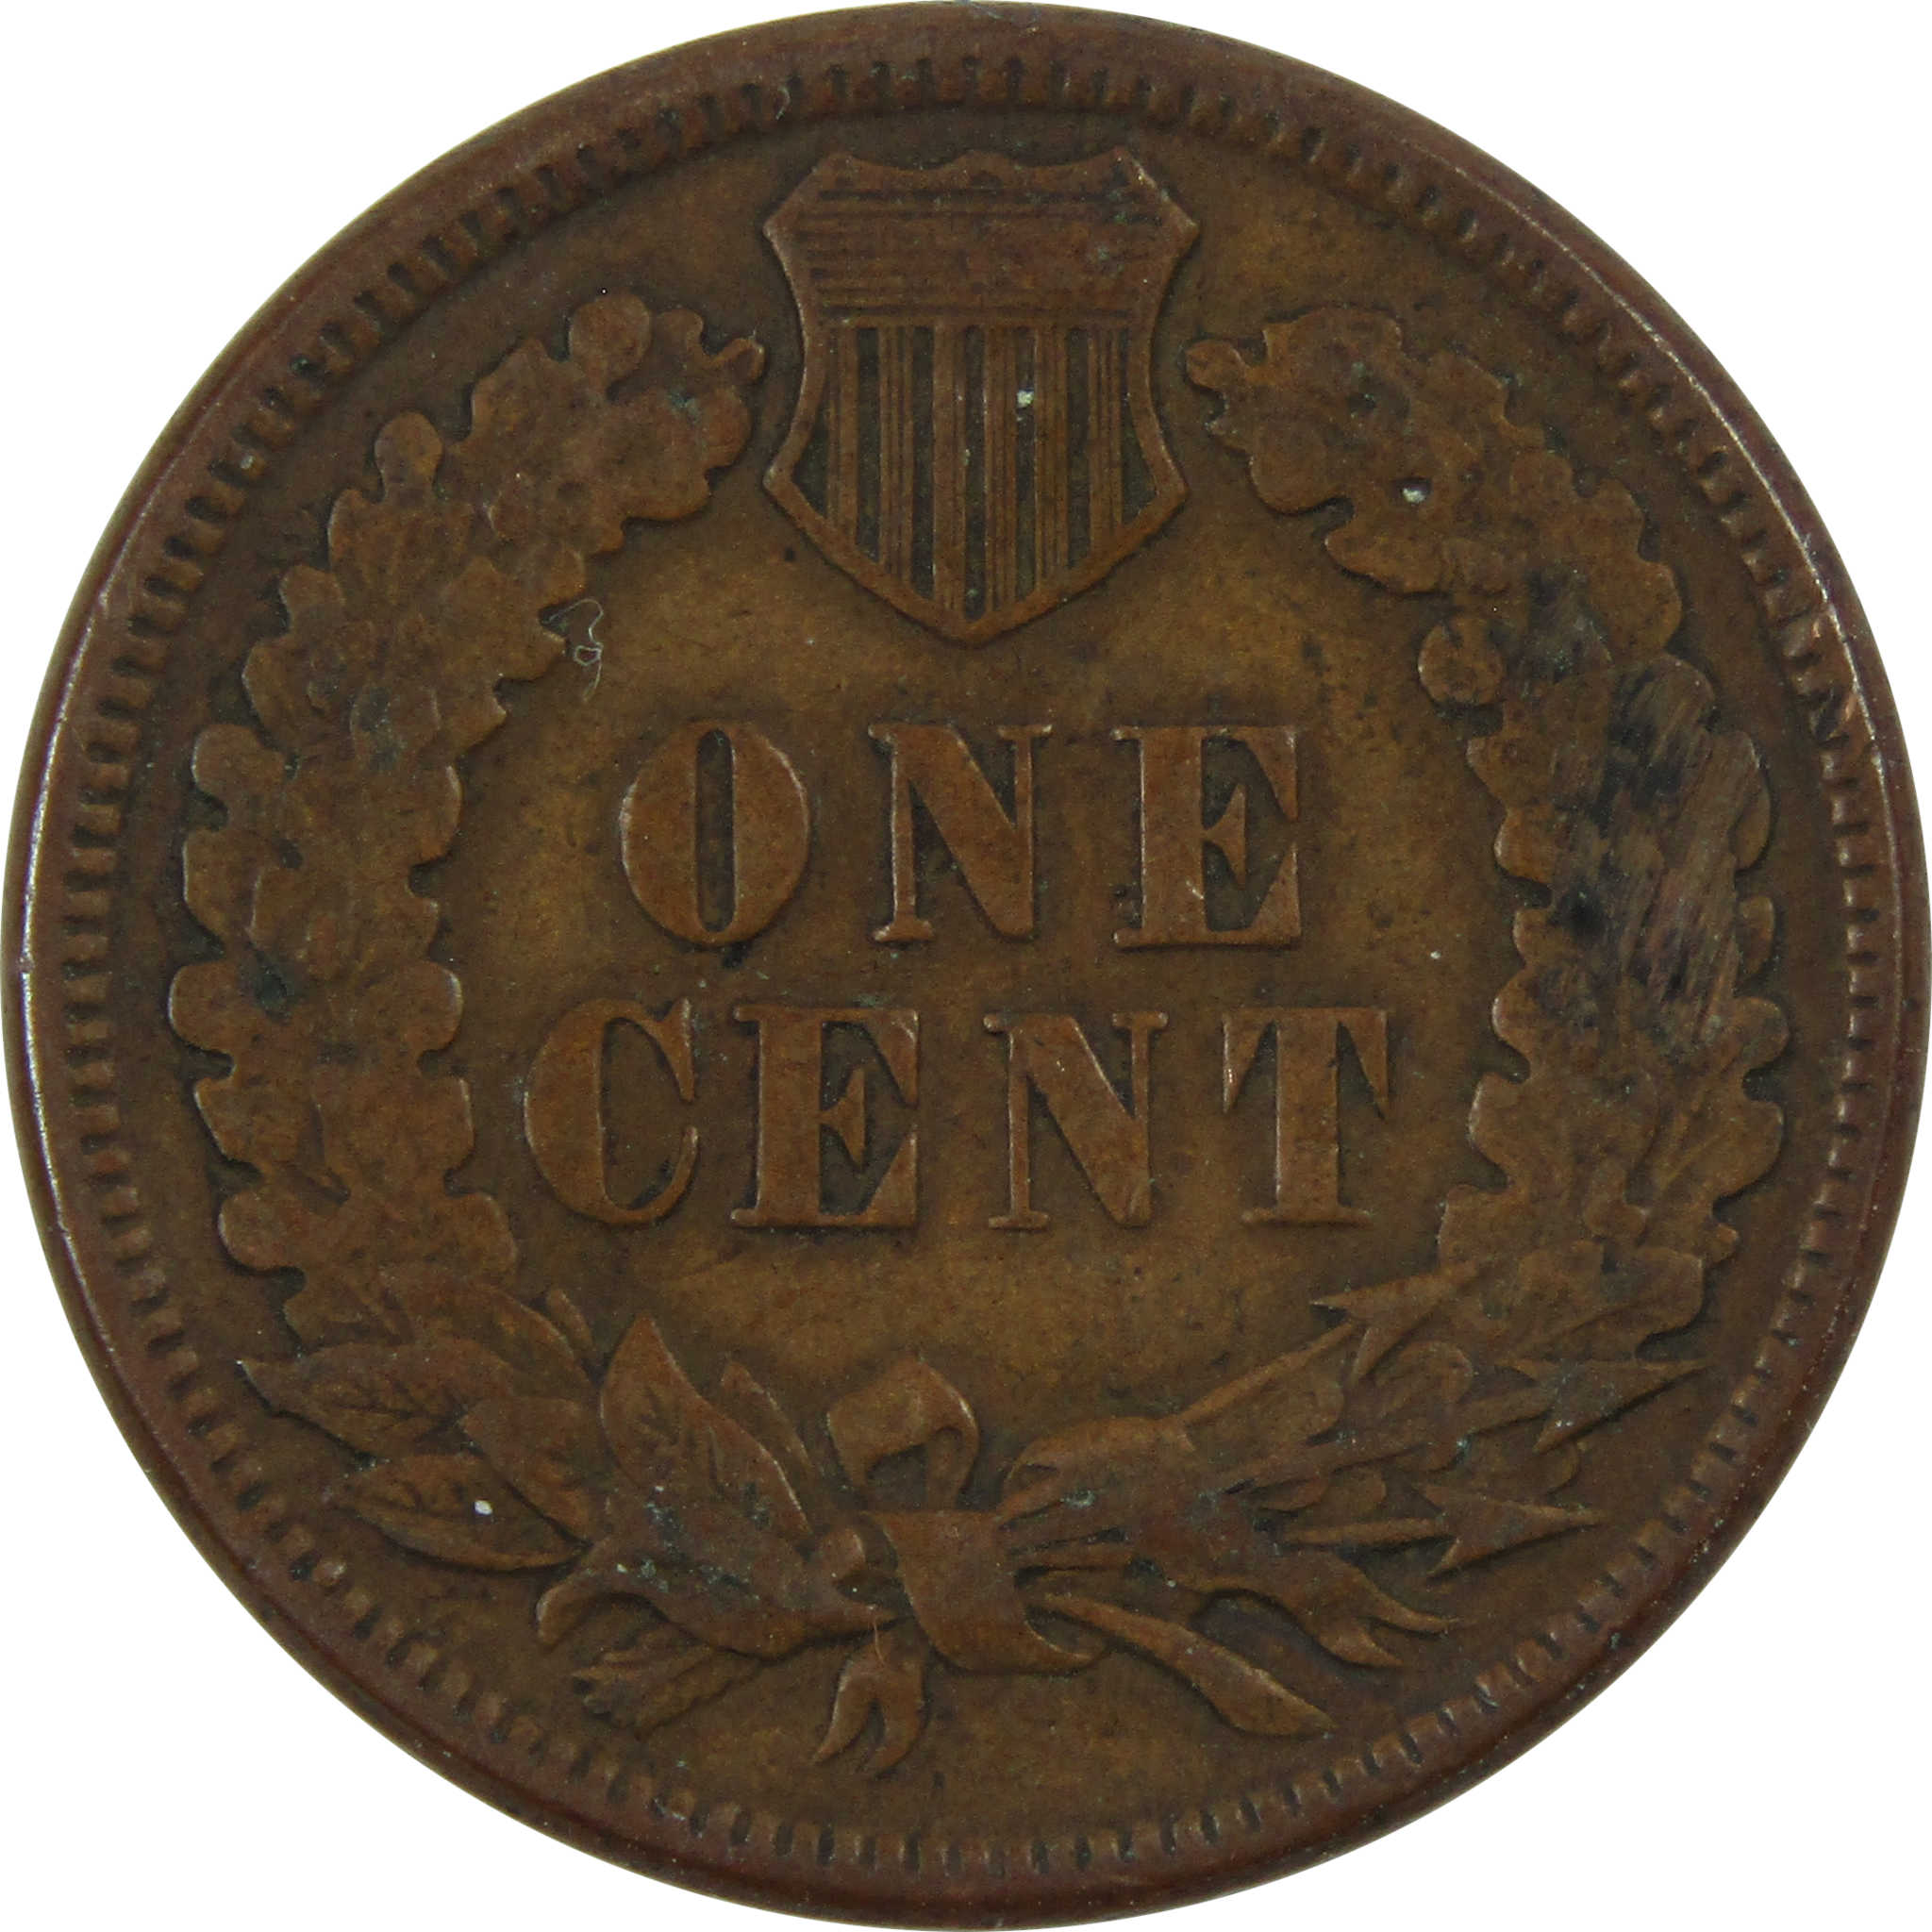 1884 Indian Head Cent VF Very Fine Penny 1c Coin SKU:I12436